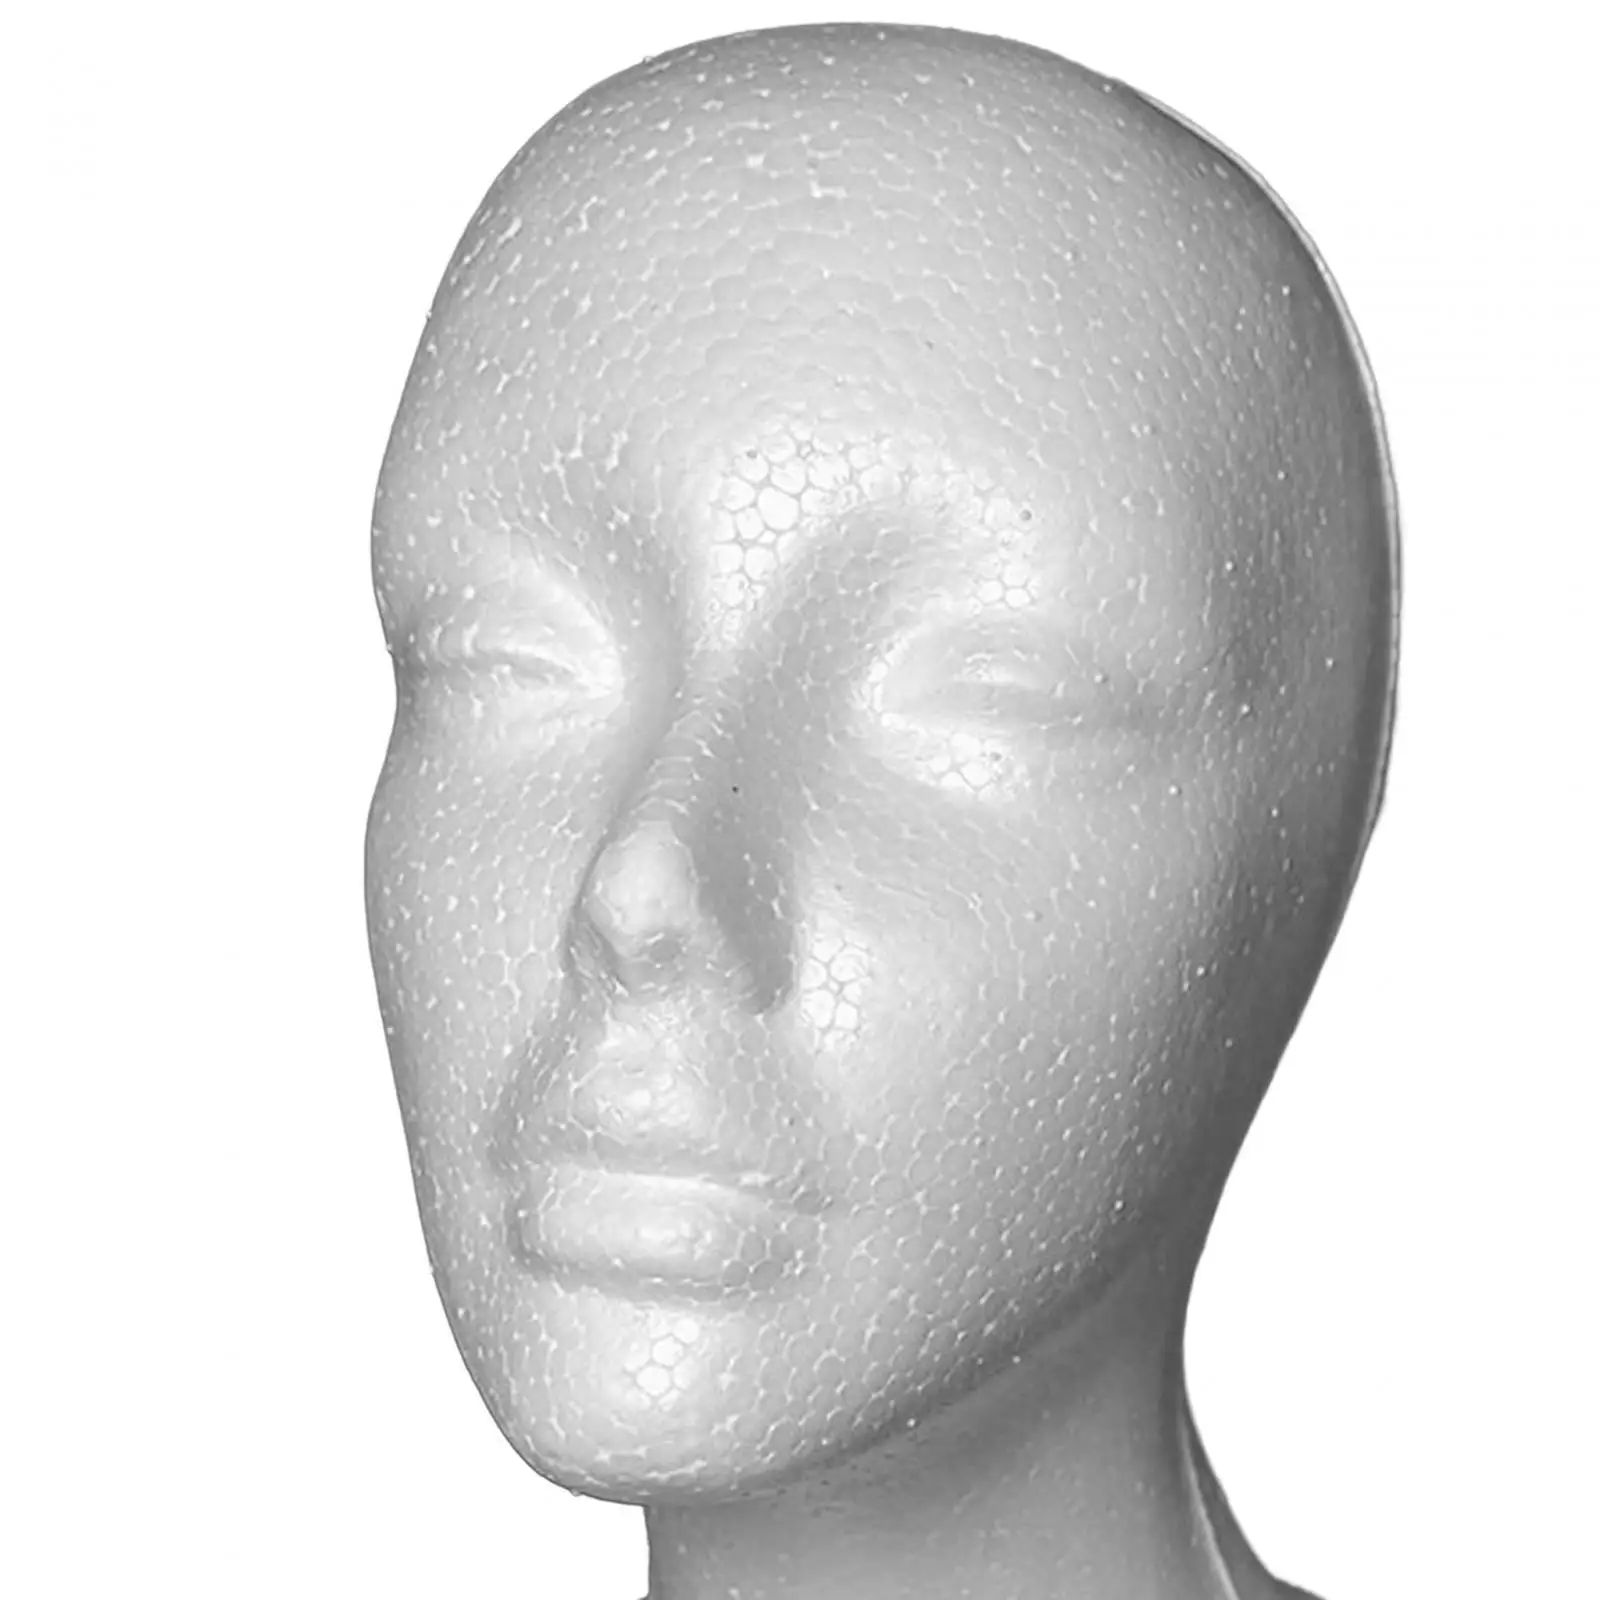 Styrofoam Wig Head Portable Stable Base Wig Stand Mannequin Head Hats Glasses Headband Hairpieces Display Stand for Props Salon